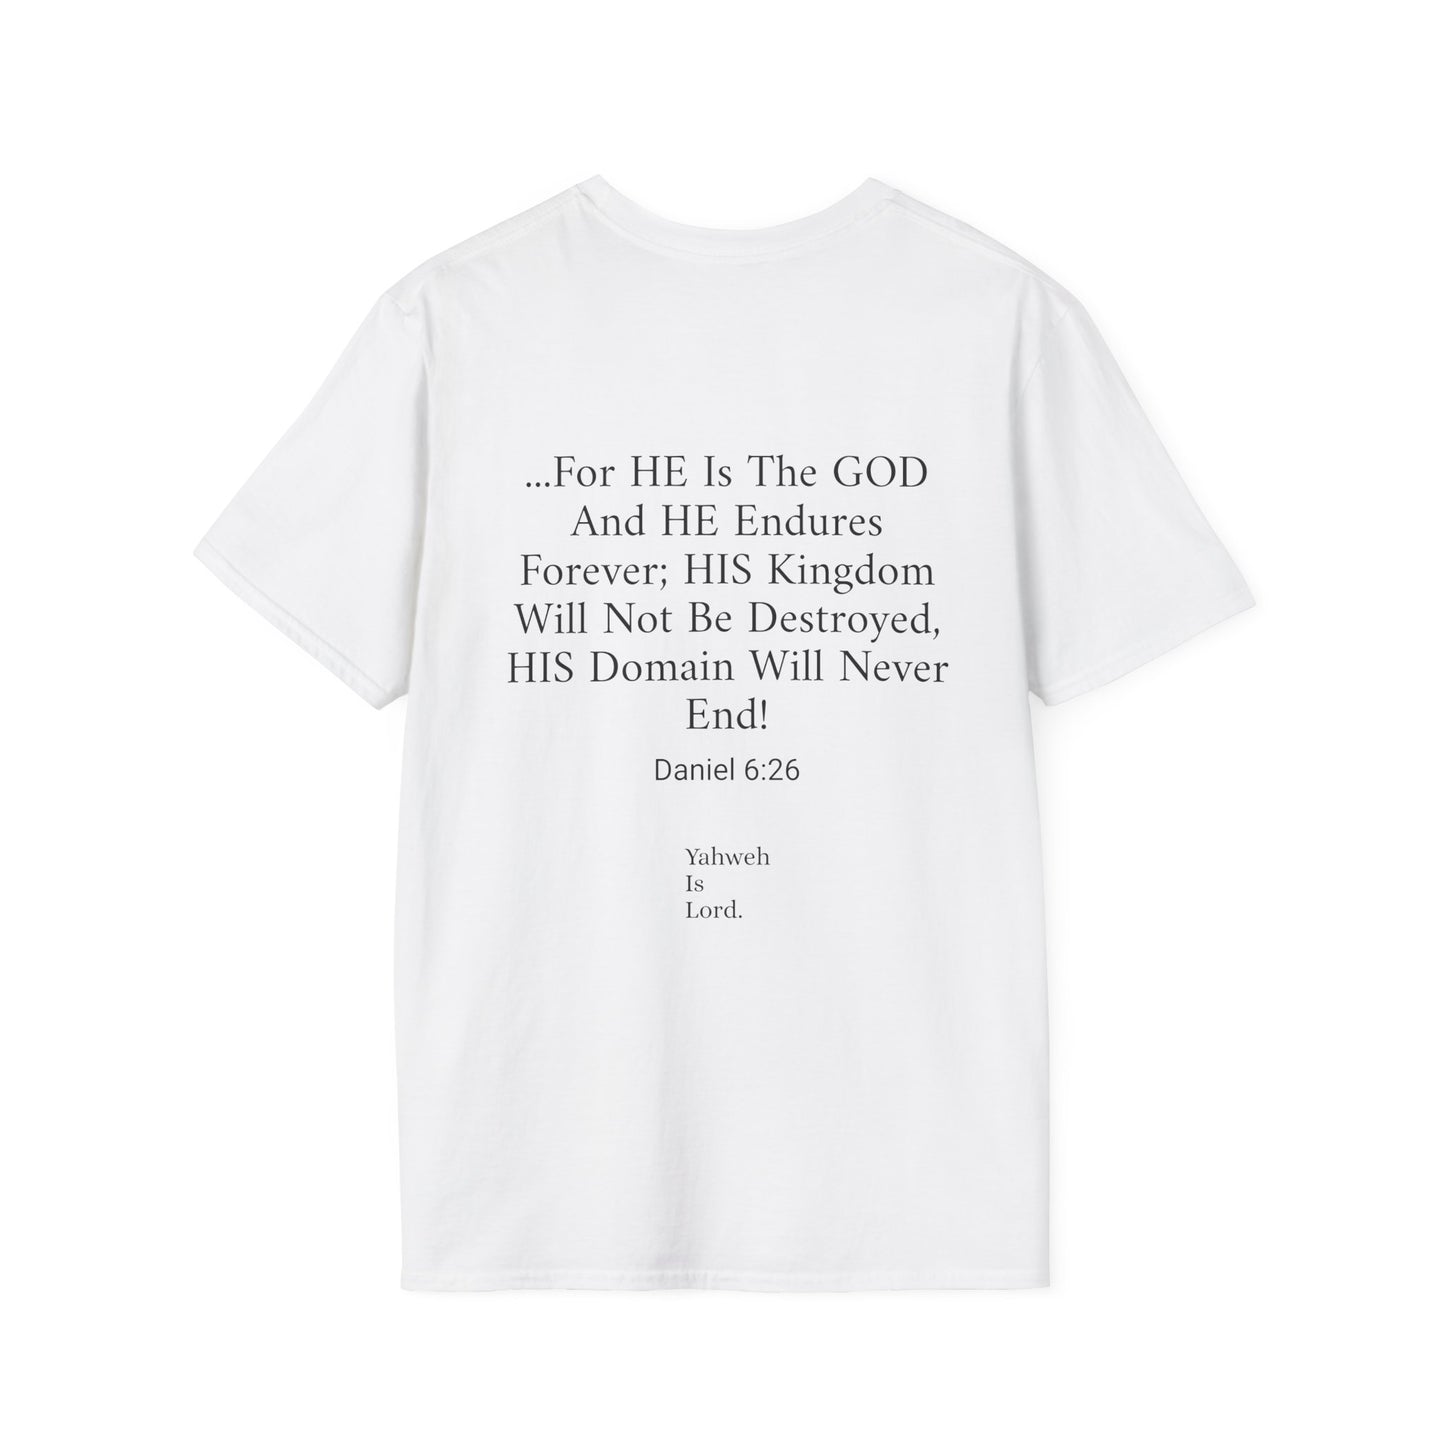 "For HE Is The GOD" Unisex Softstyle T-Shirt